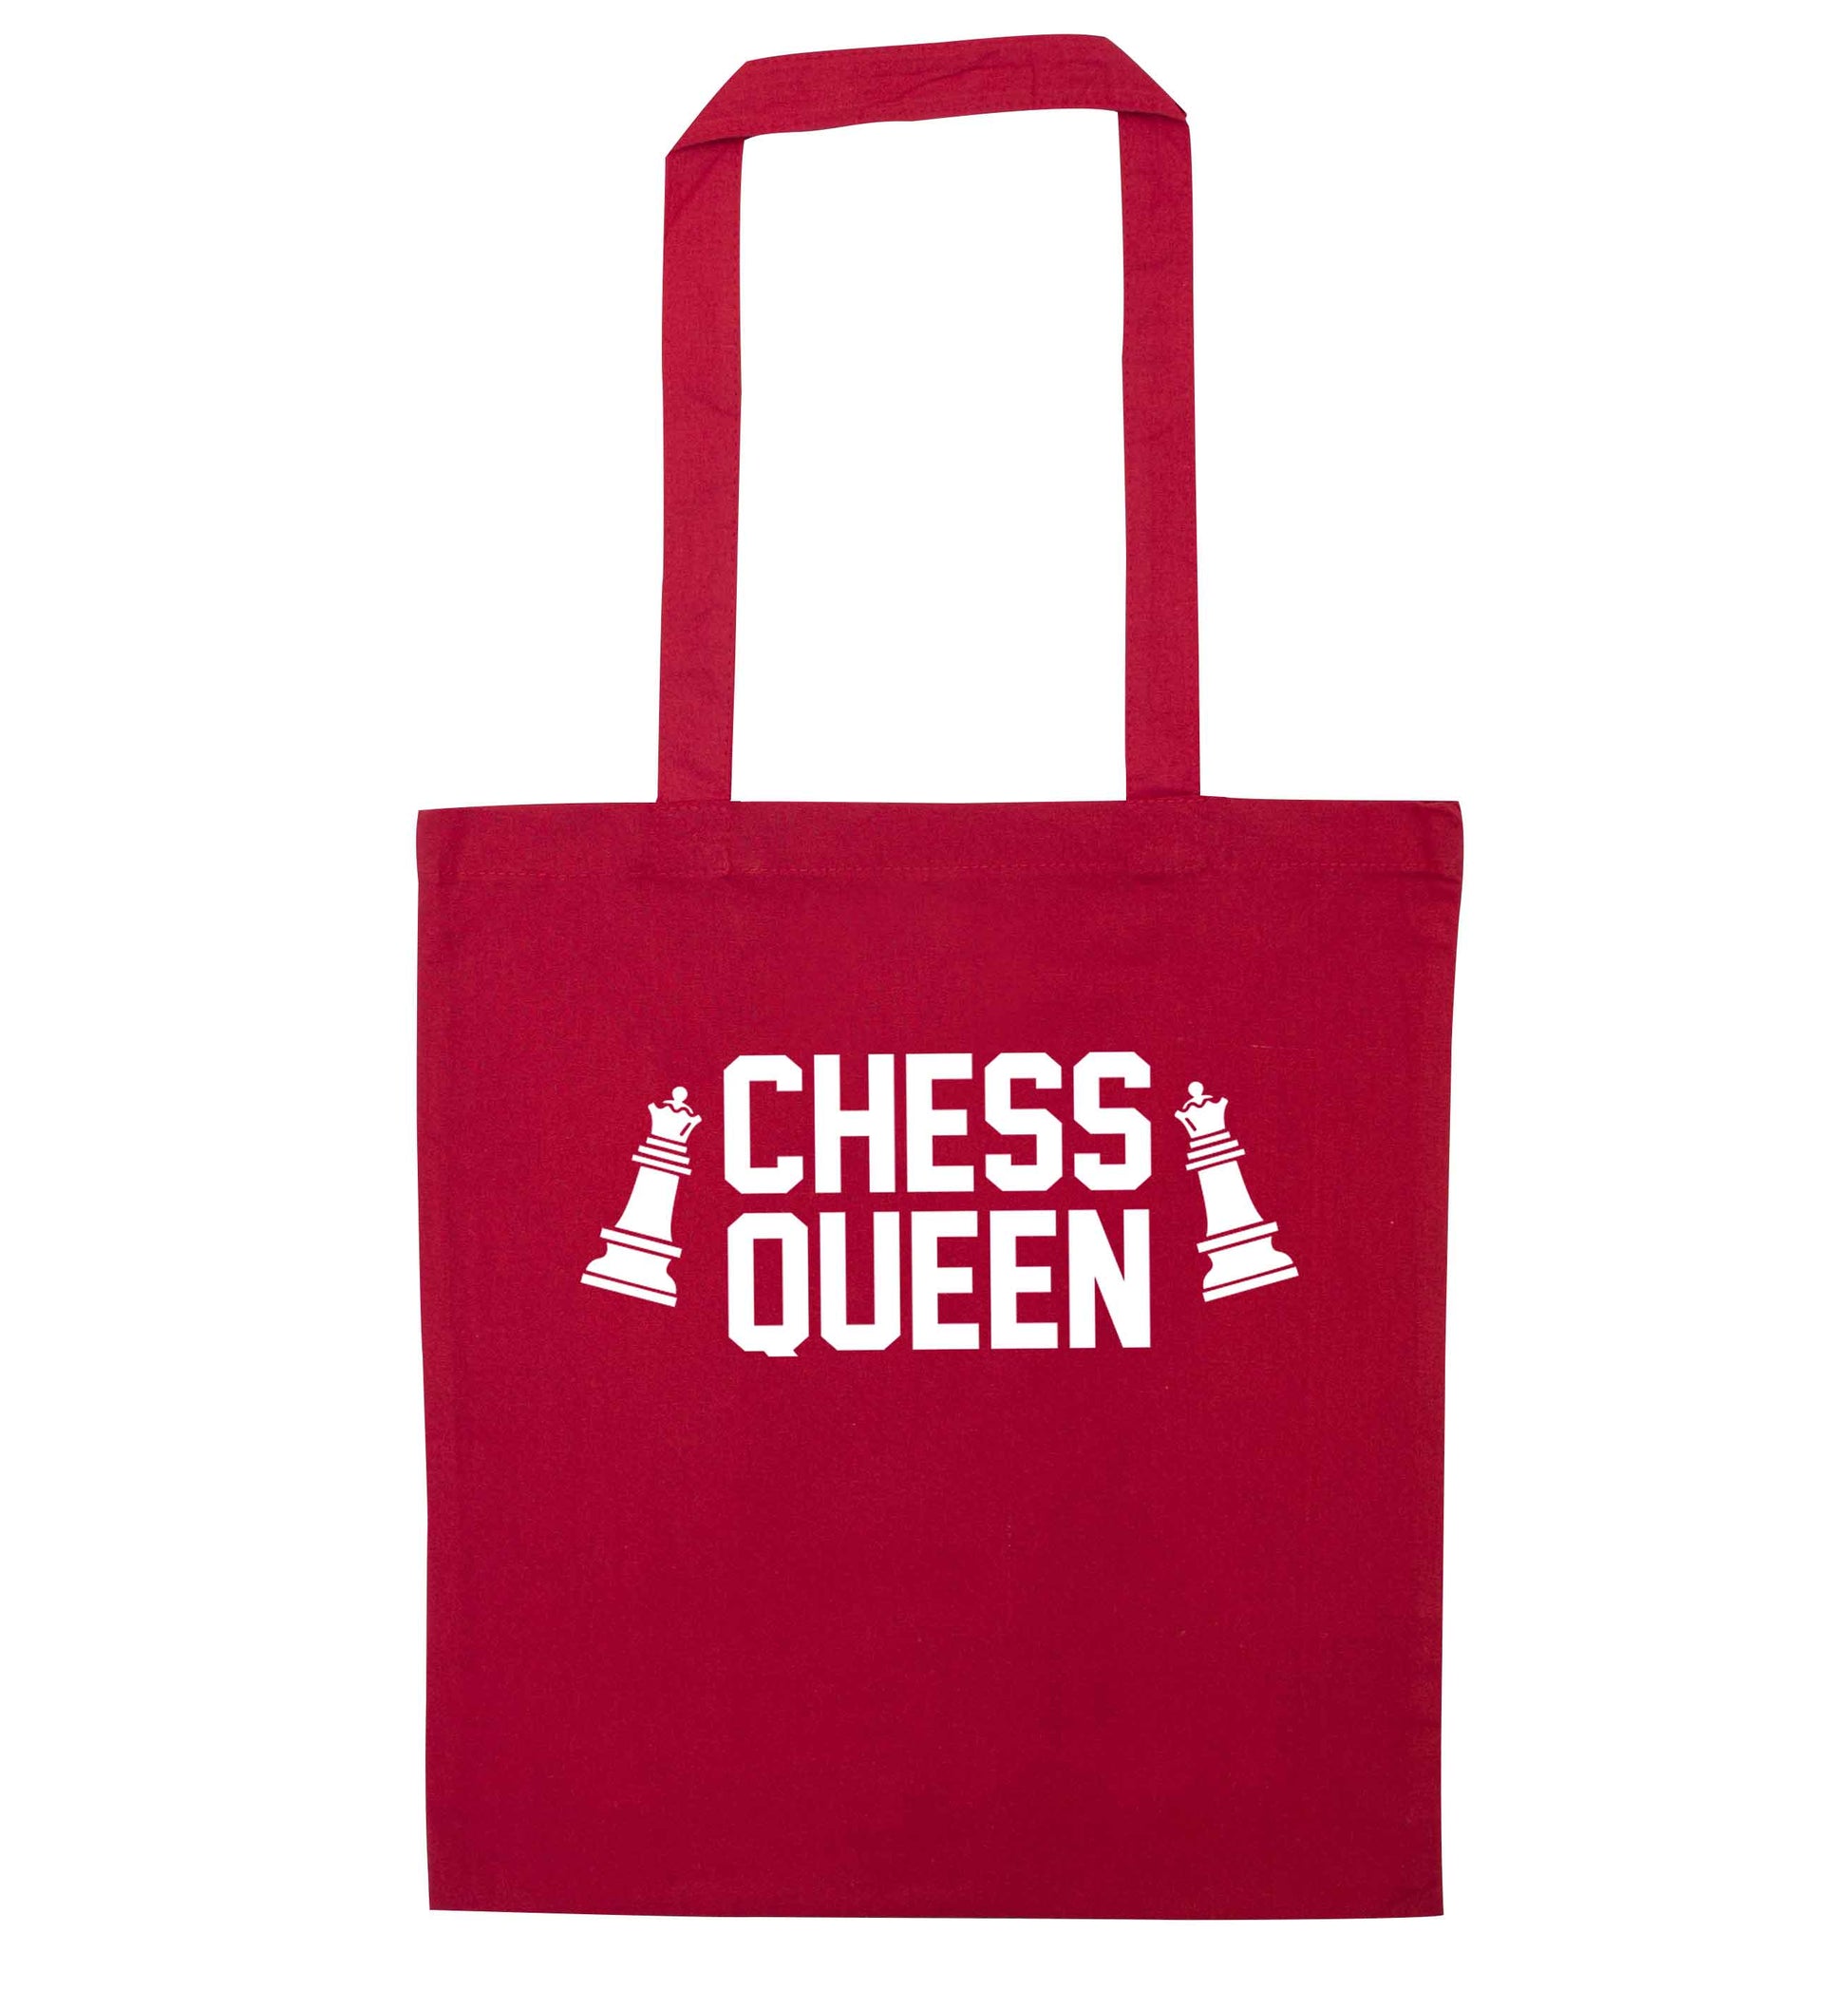 Chess queen red tote bag